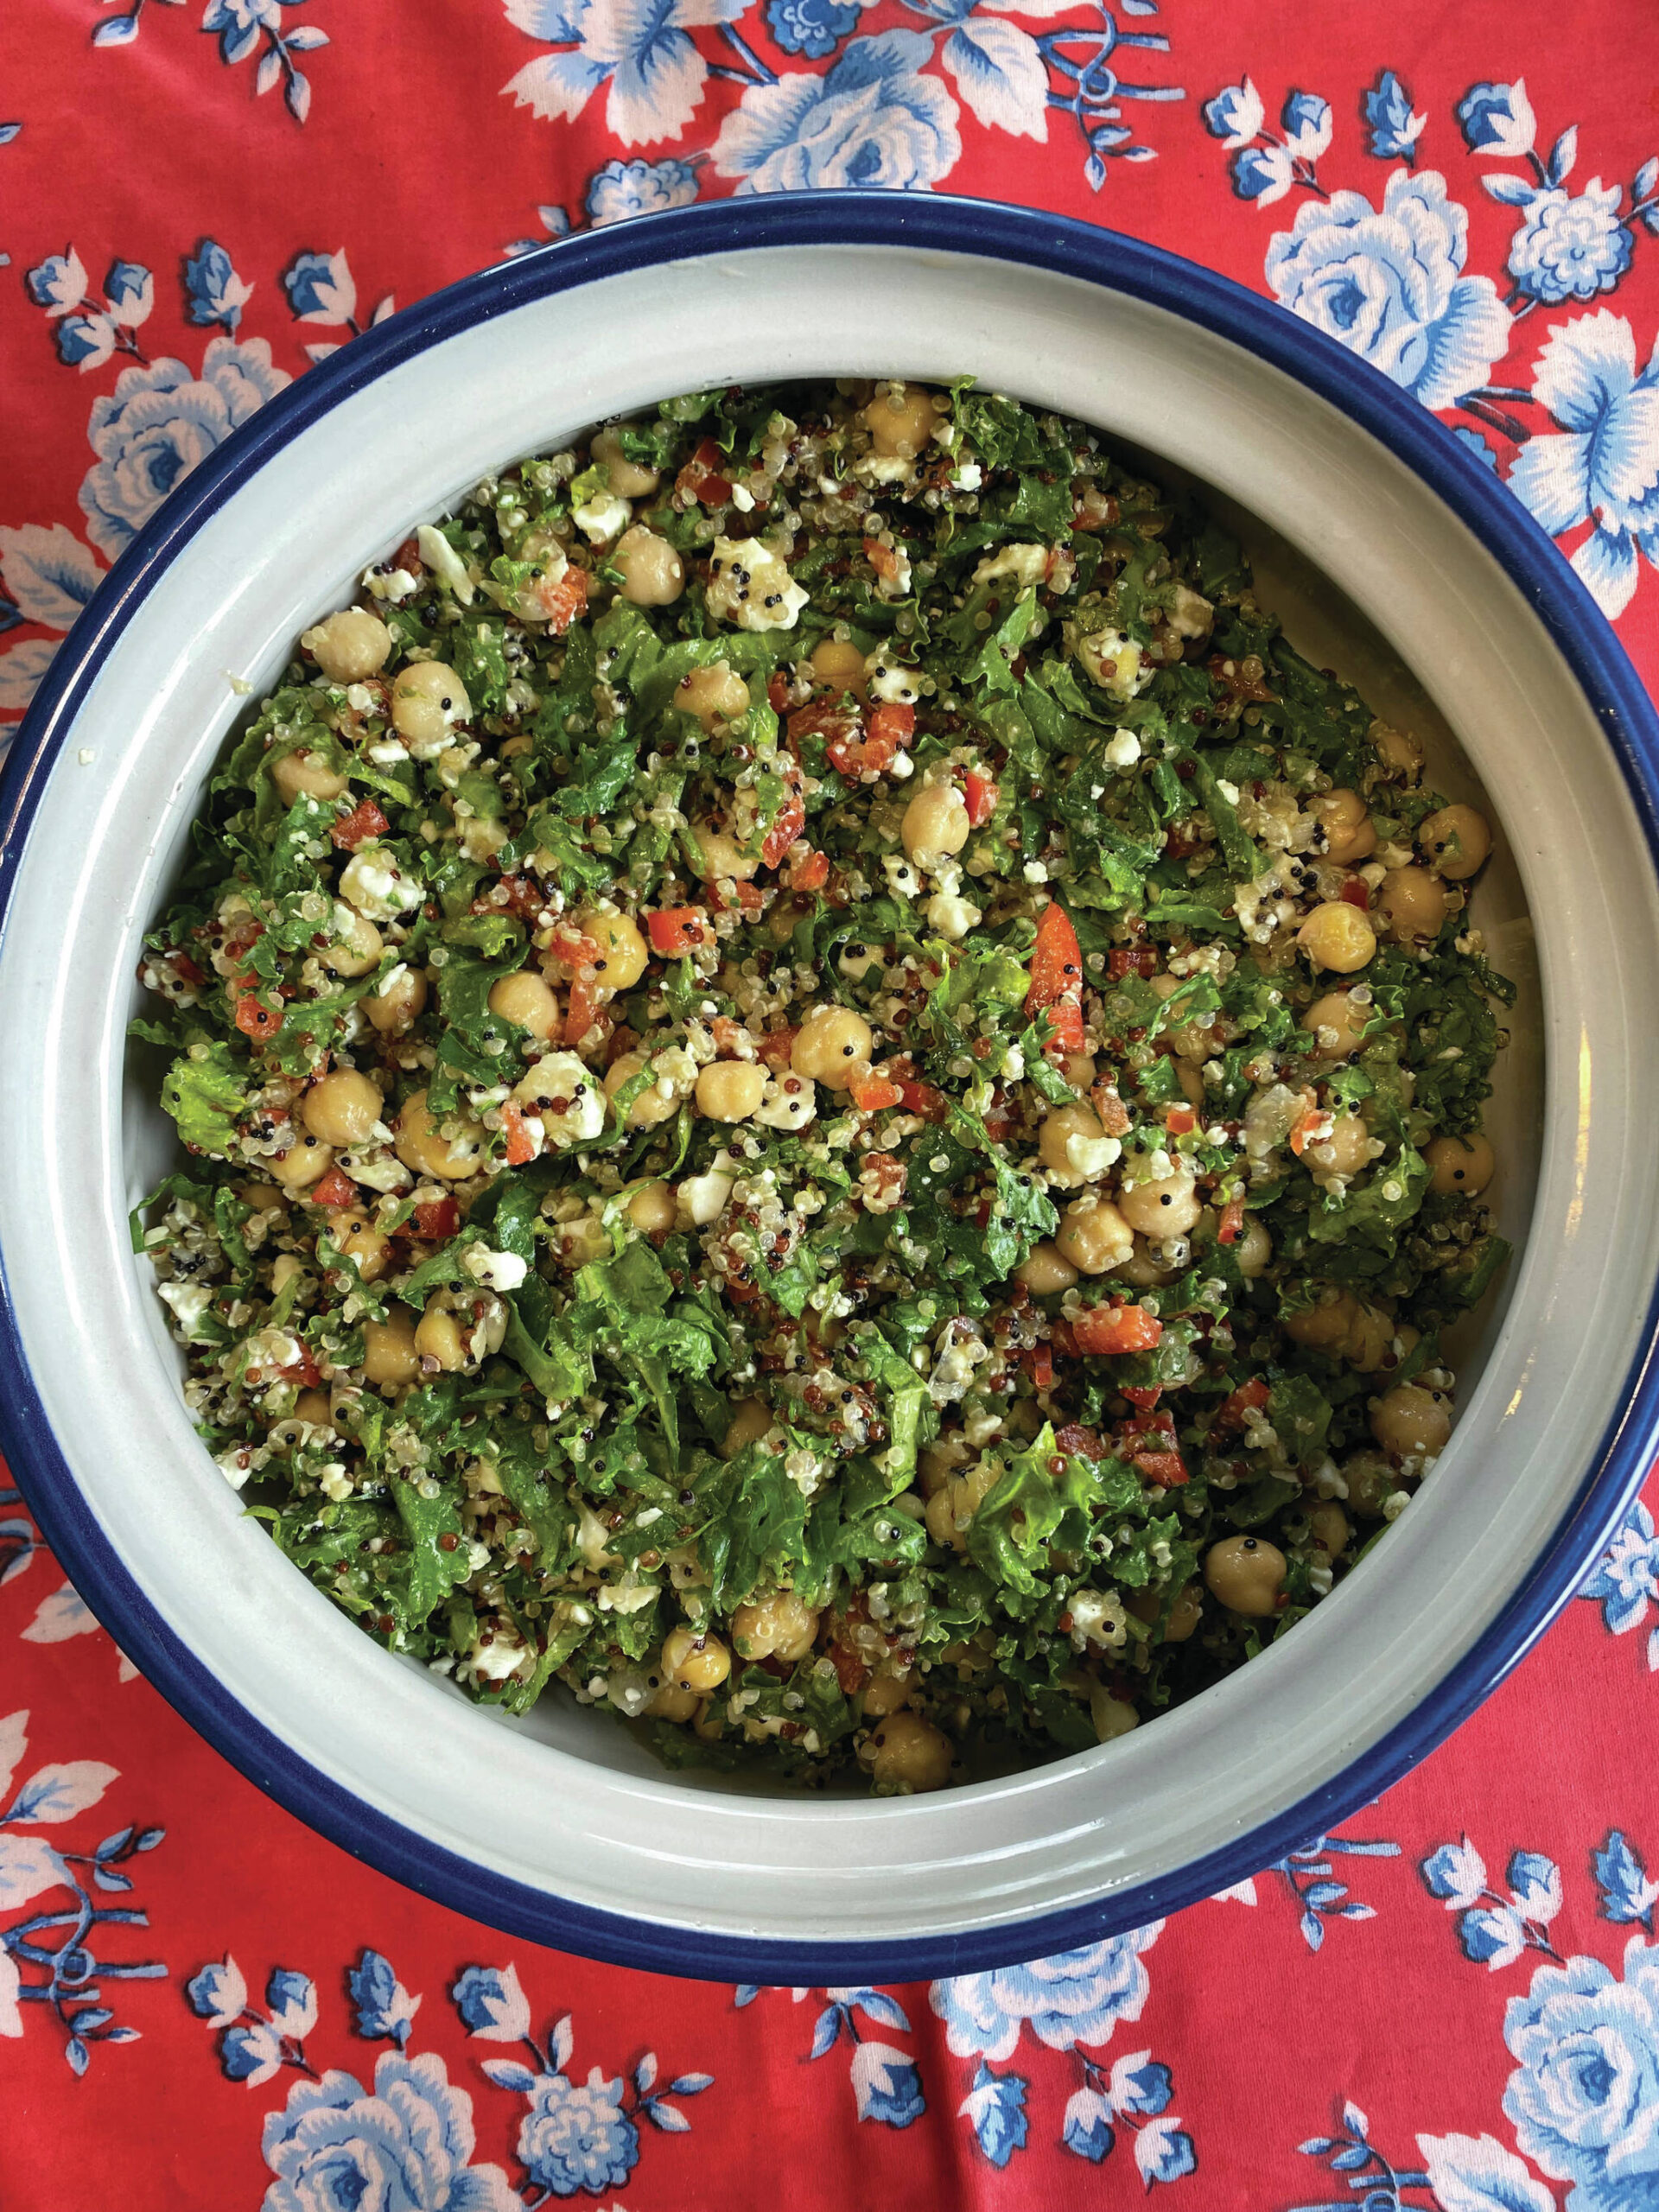 Photo by Tressa Dale/Peninsula Clarion
Quinoa Chickpea Kale Salad is packed with filling protein and great nutrition without being too heavy on the stomach.